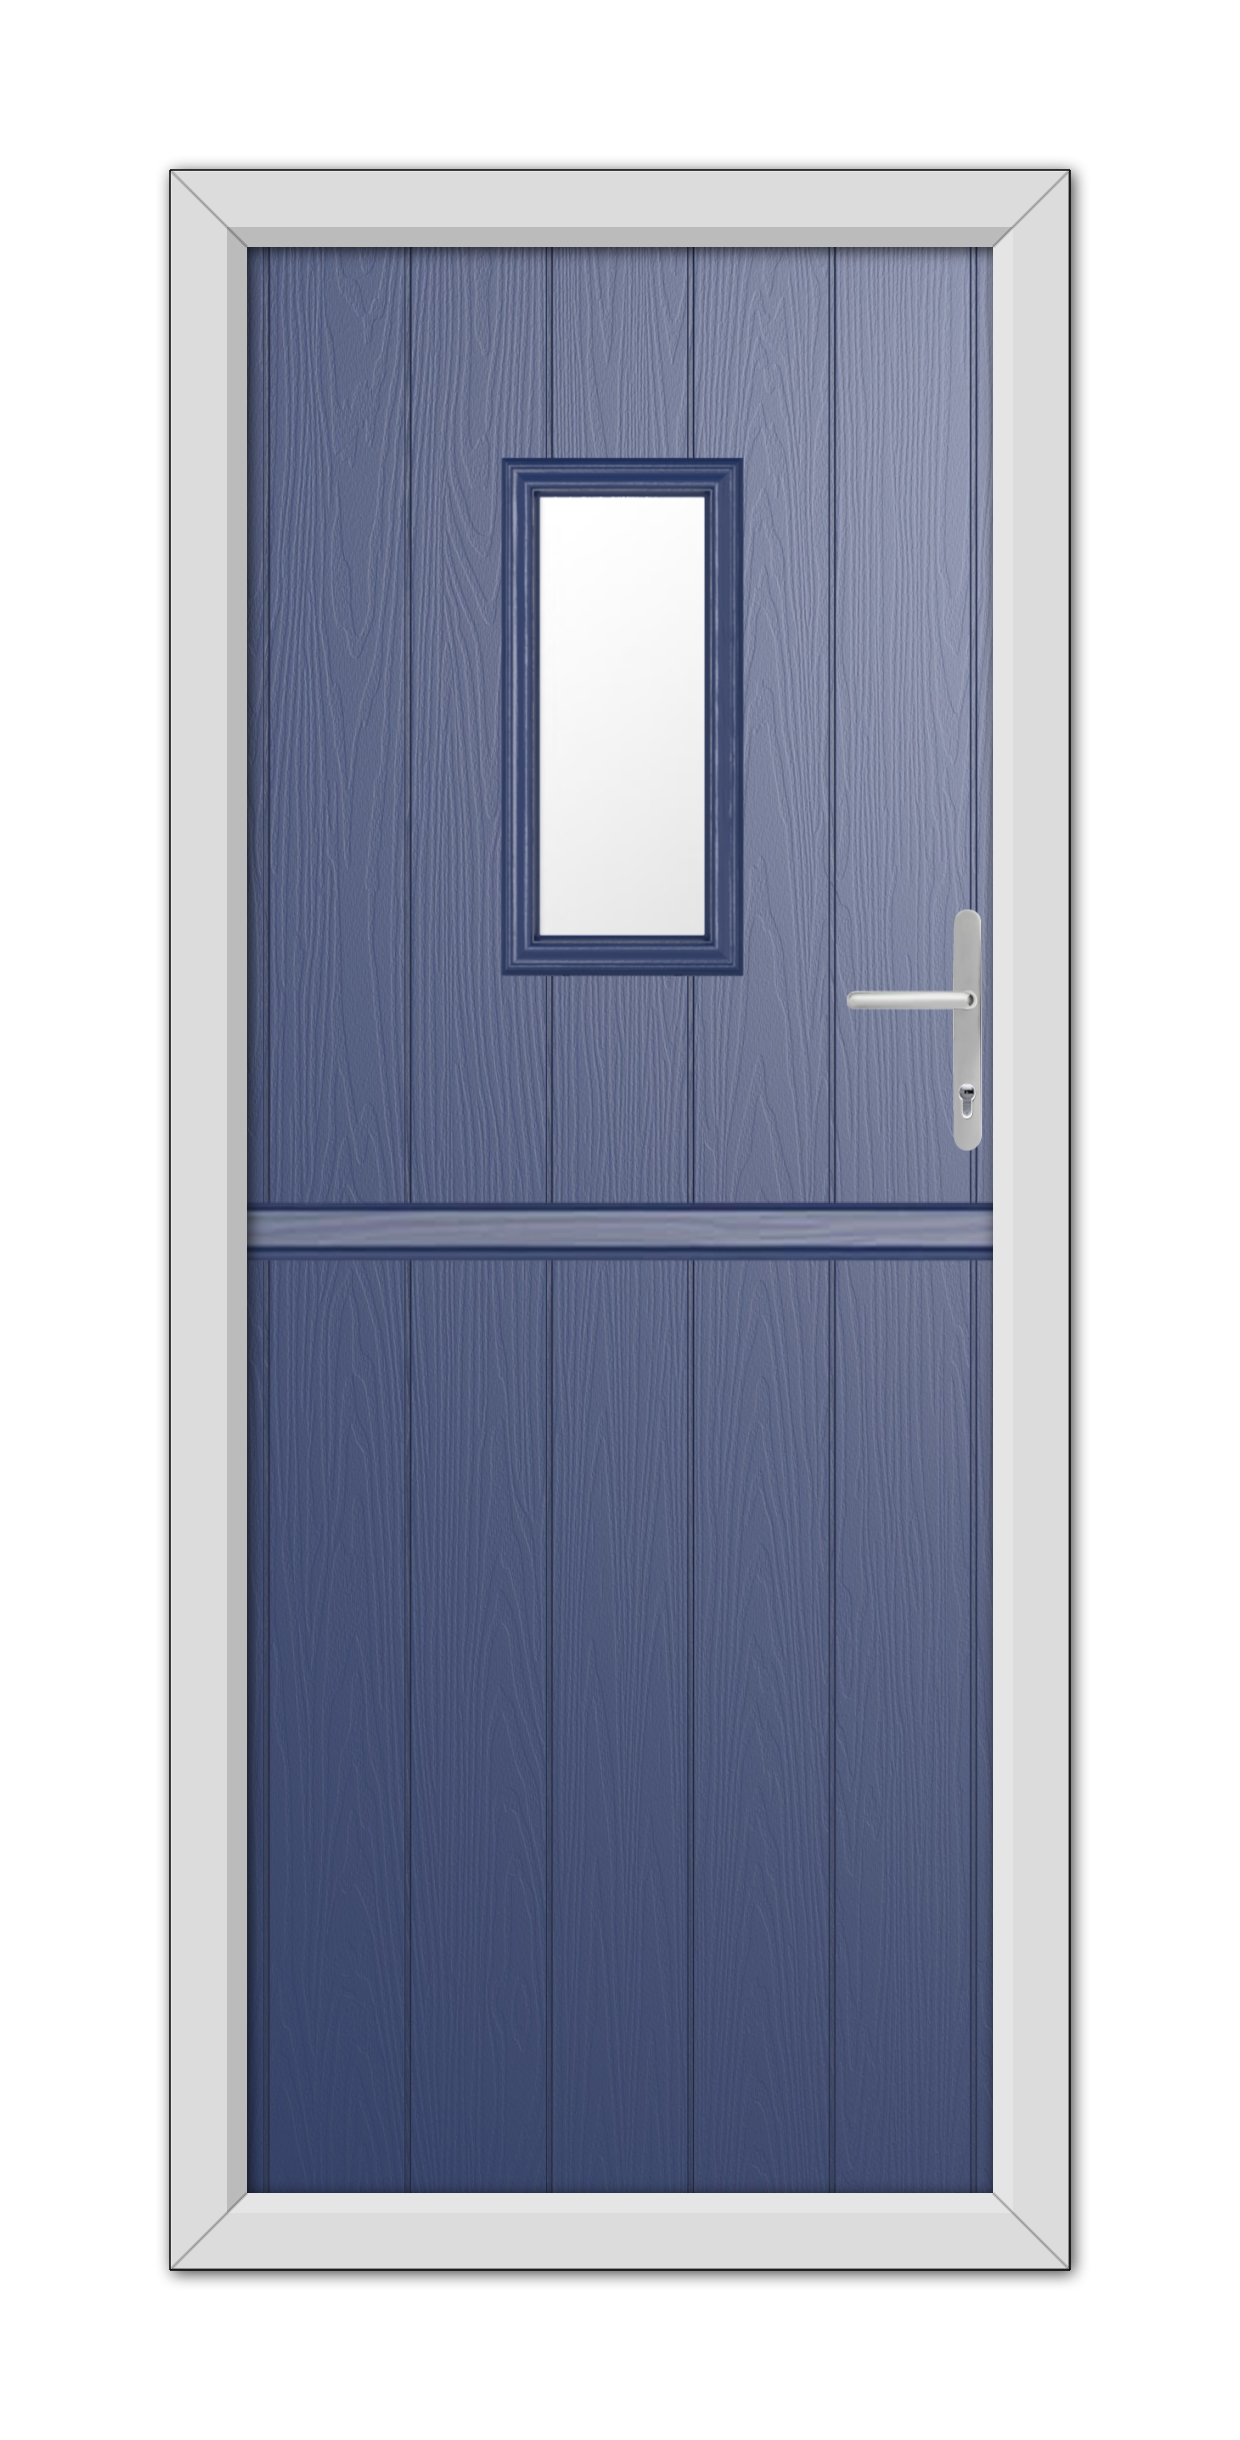 A Blue Somerset Stable Composite Door 48mm Timber Core with a small square window, set in a white frame, featuring a modern handle on the right side.